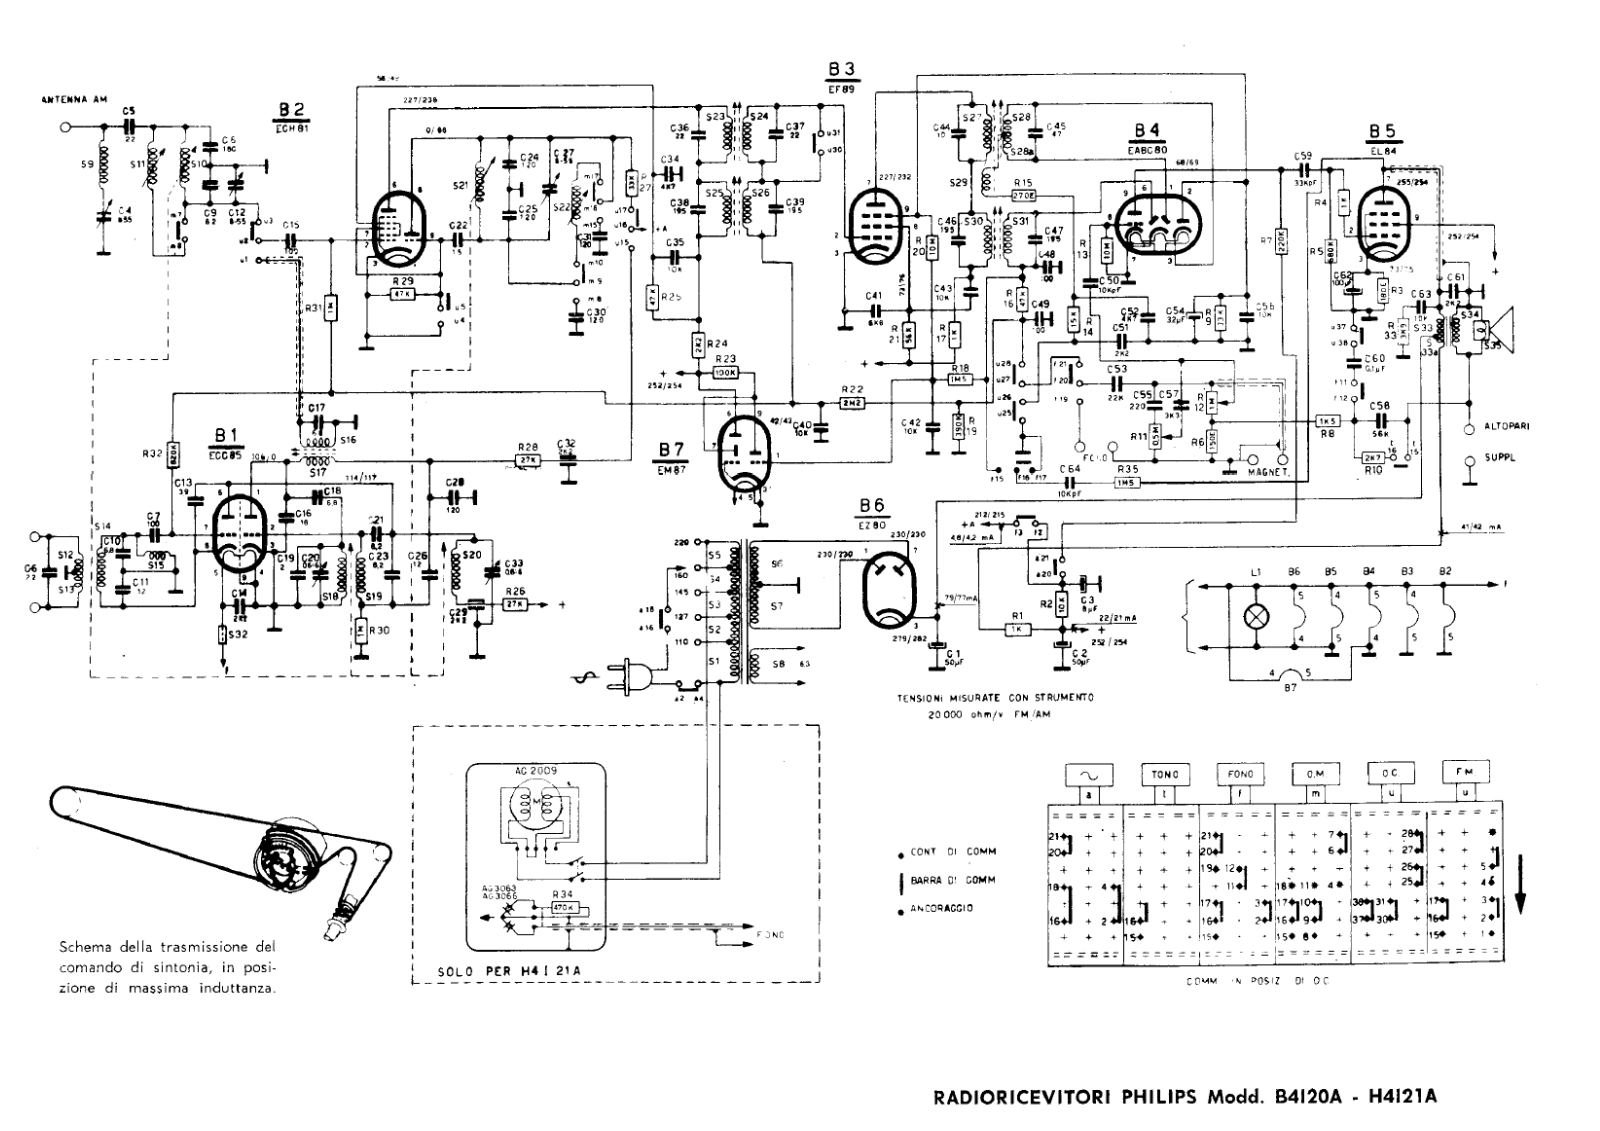 Philips b4i20a, h4i21a schematic